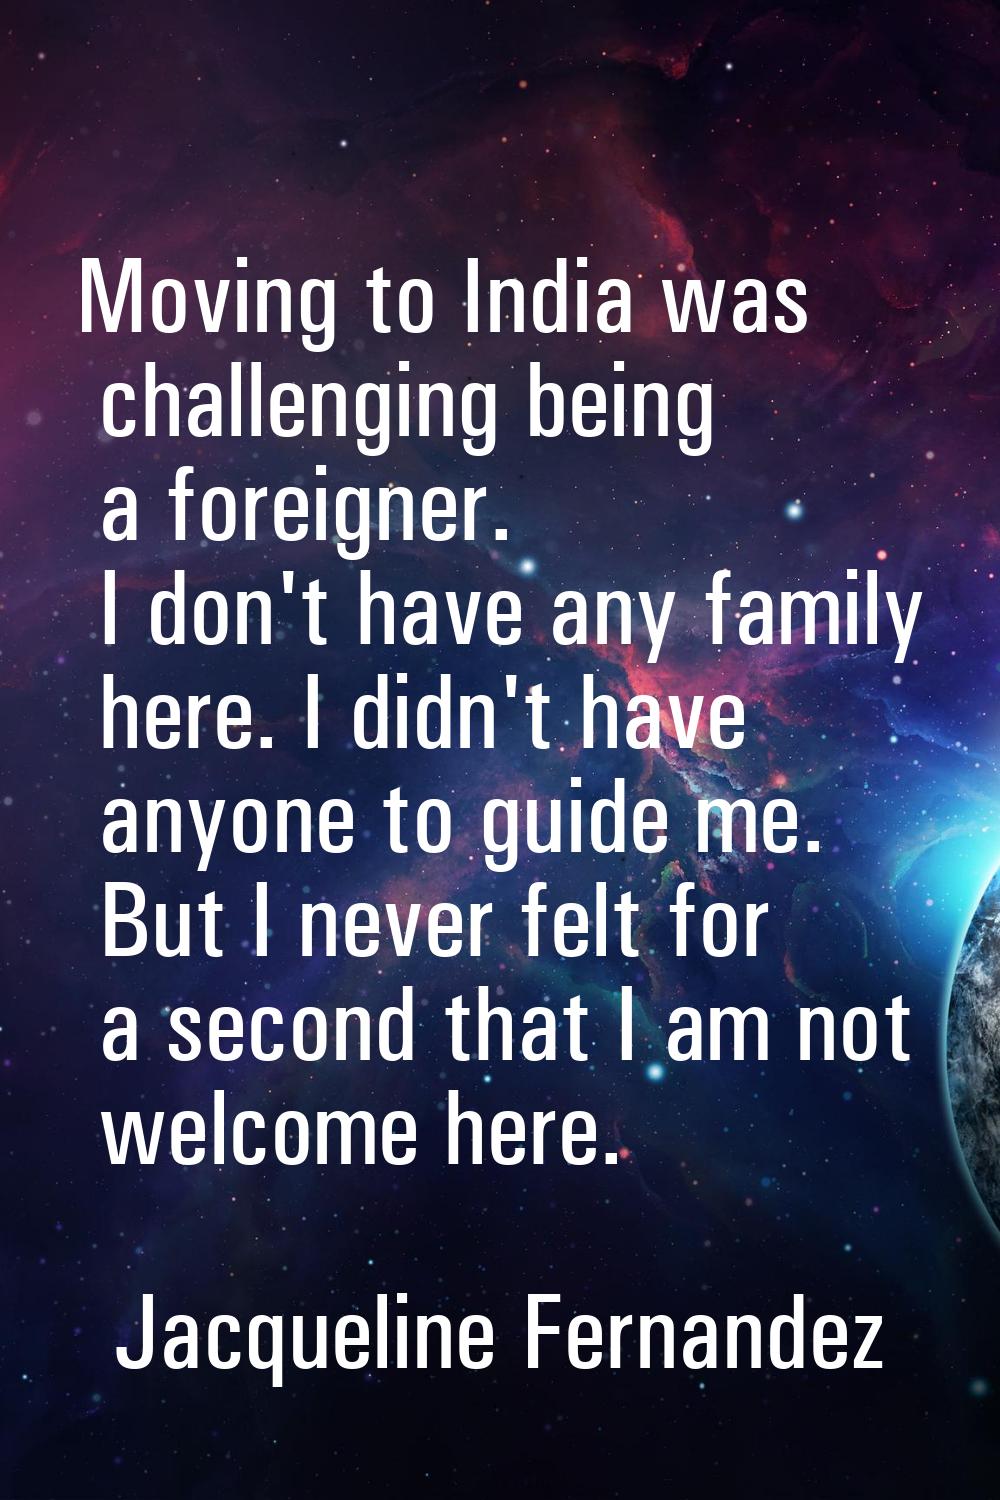 Moving to India was challenging being a foreigner. I don't have any family here. I didn't have anyo